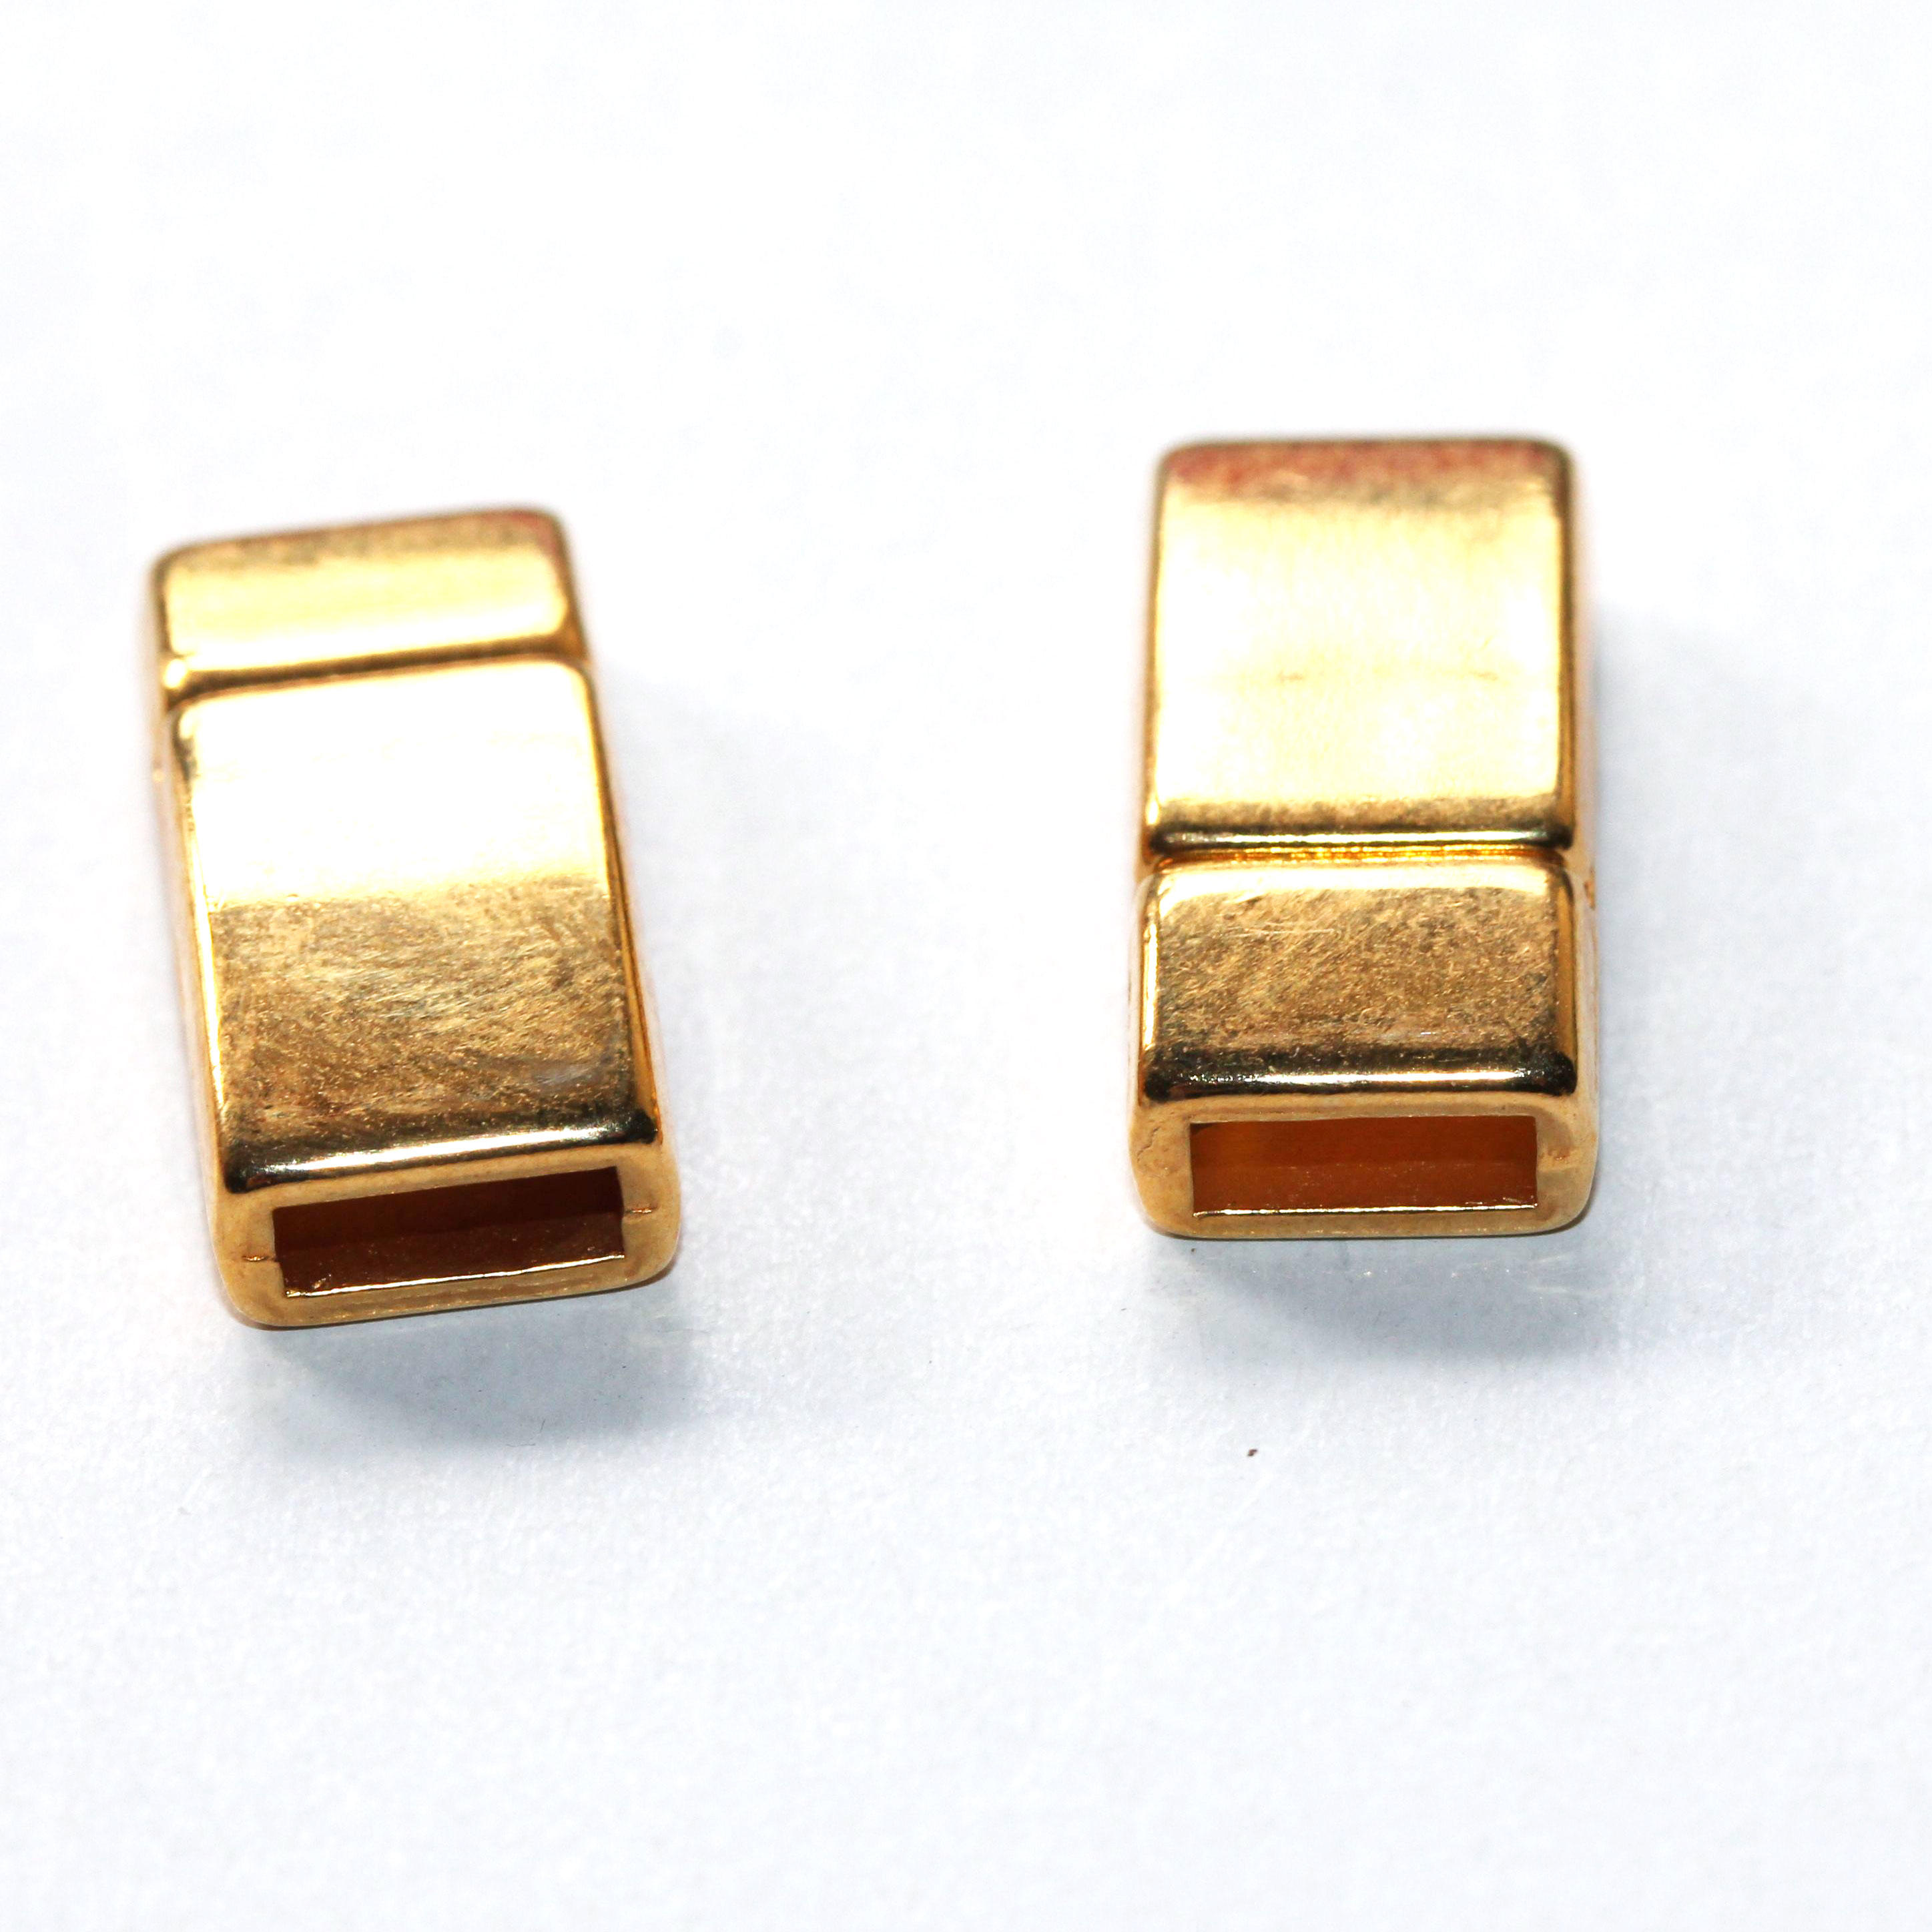 Gold Magnetic Clasp Fits 6/2mm leather and cords